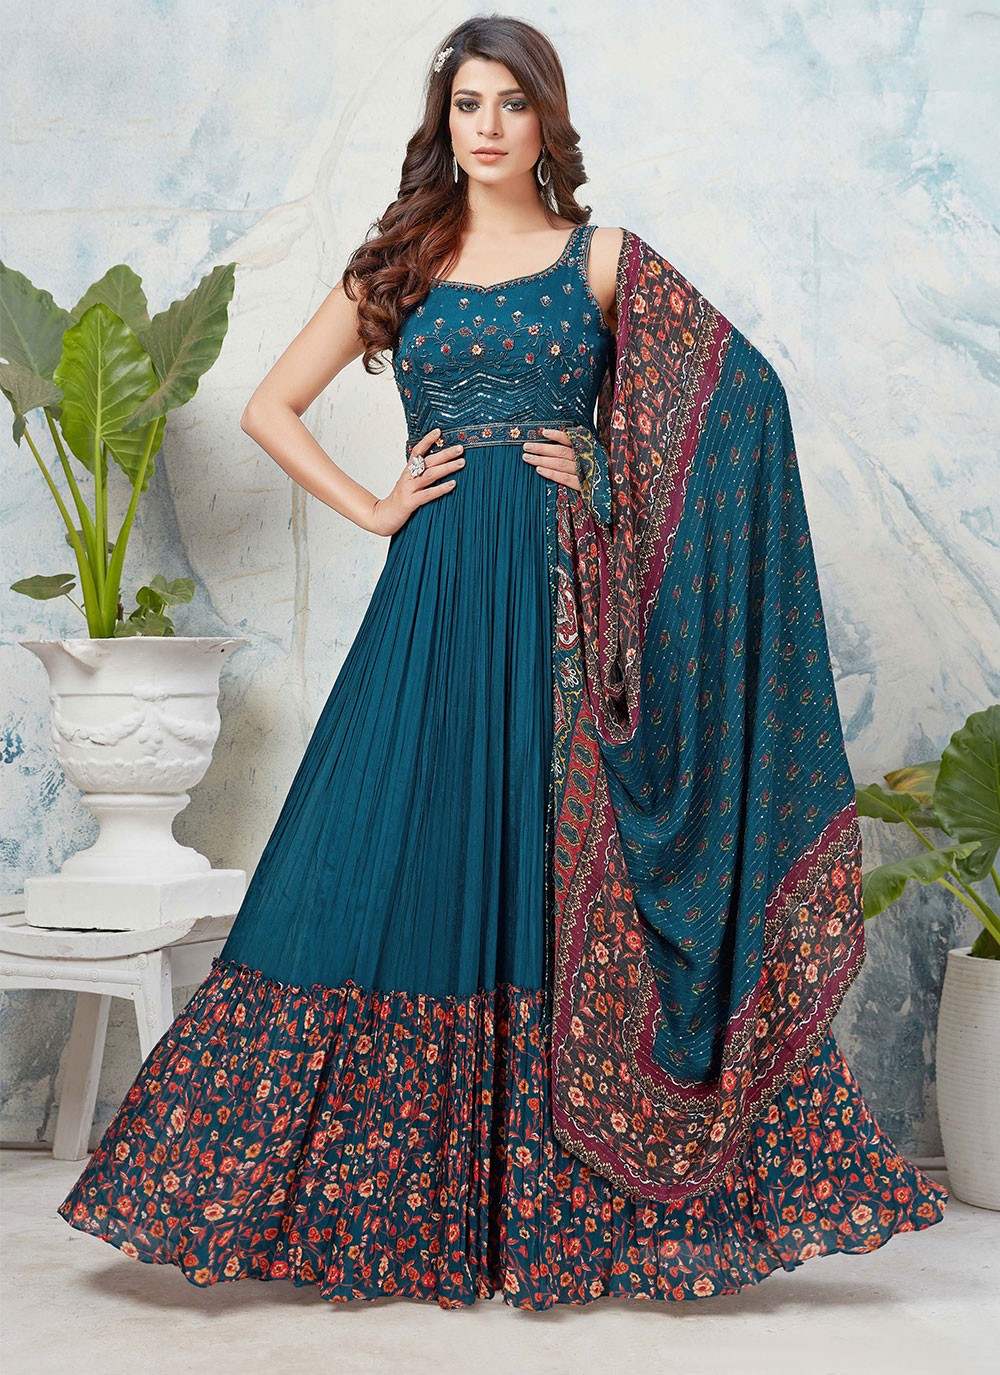 Chinon Embroidered Readymade Designer Salwar Suit in Teal